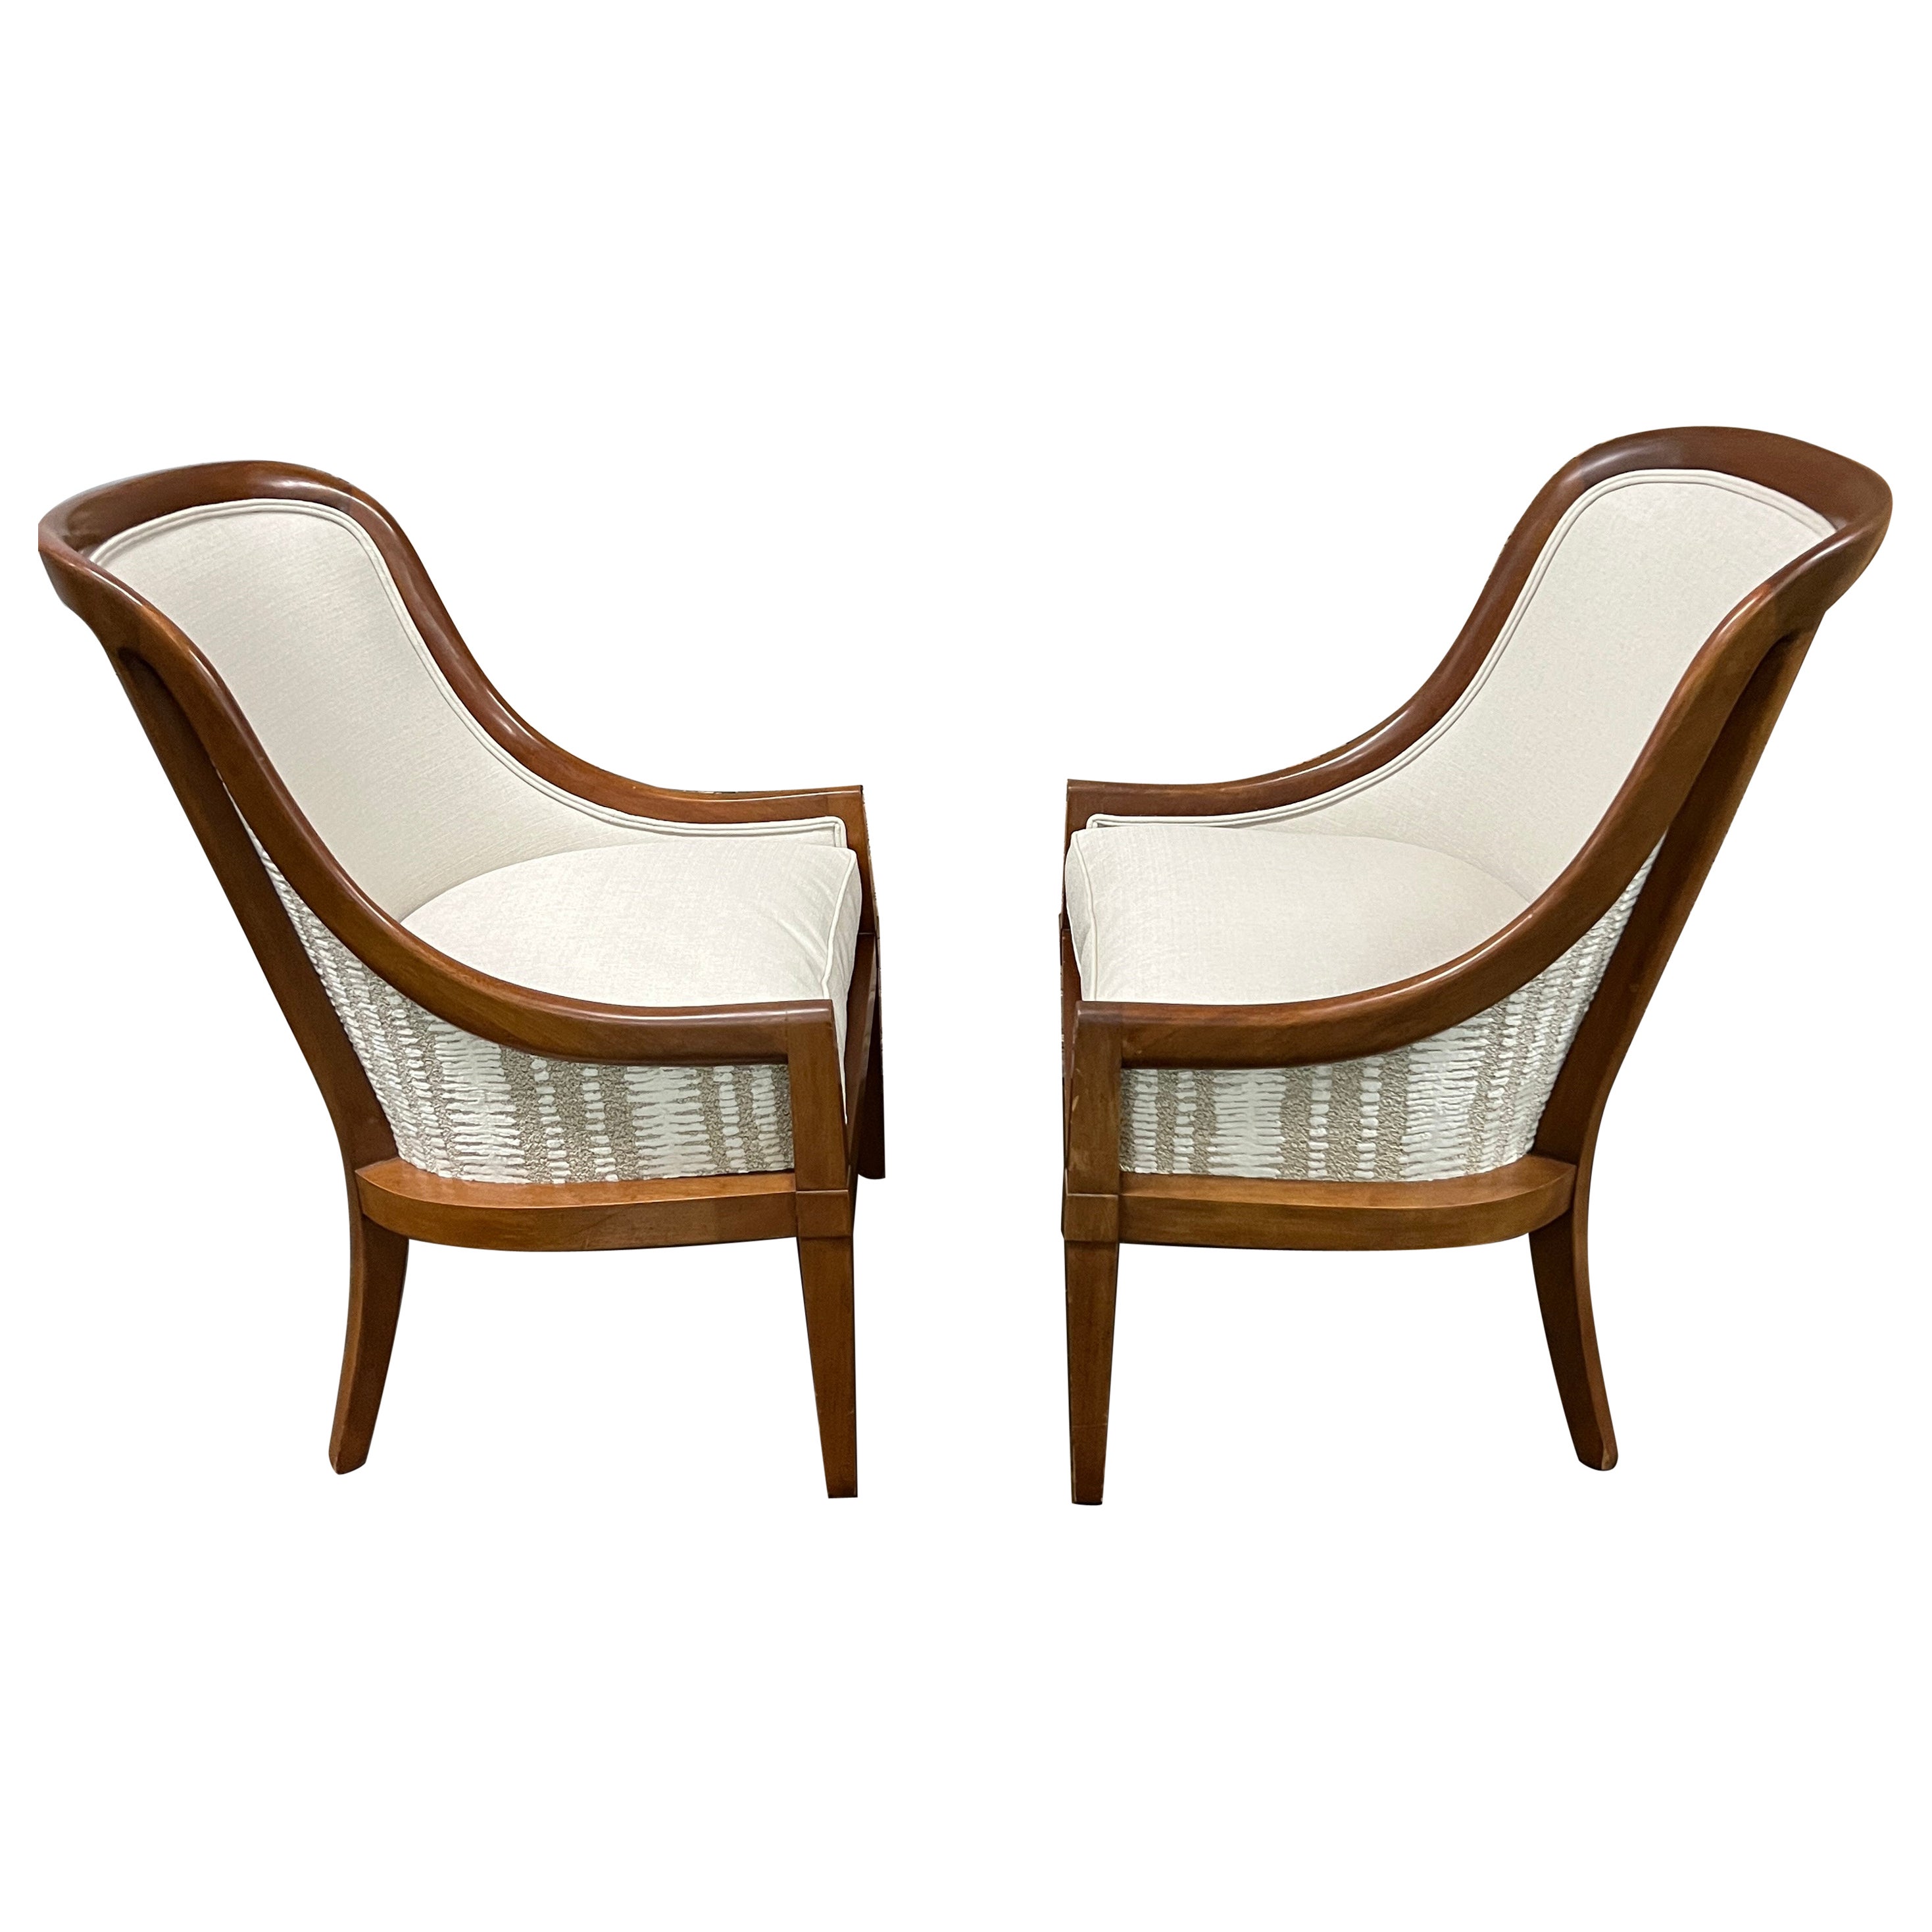 Pair of 1940's Spoon Back Lounge Chairs with Walnut Frames For Sale